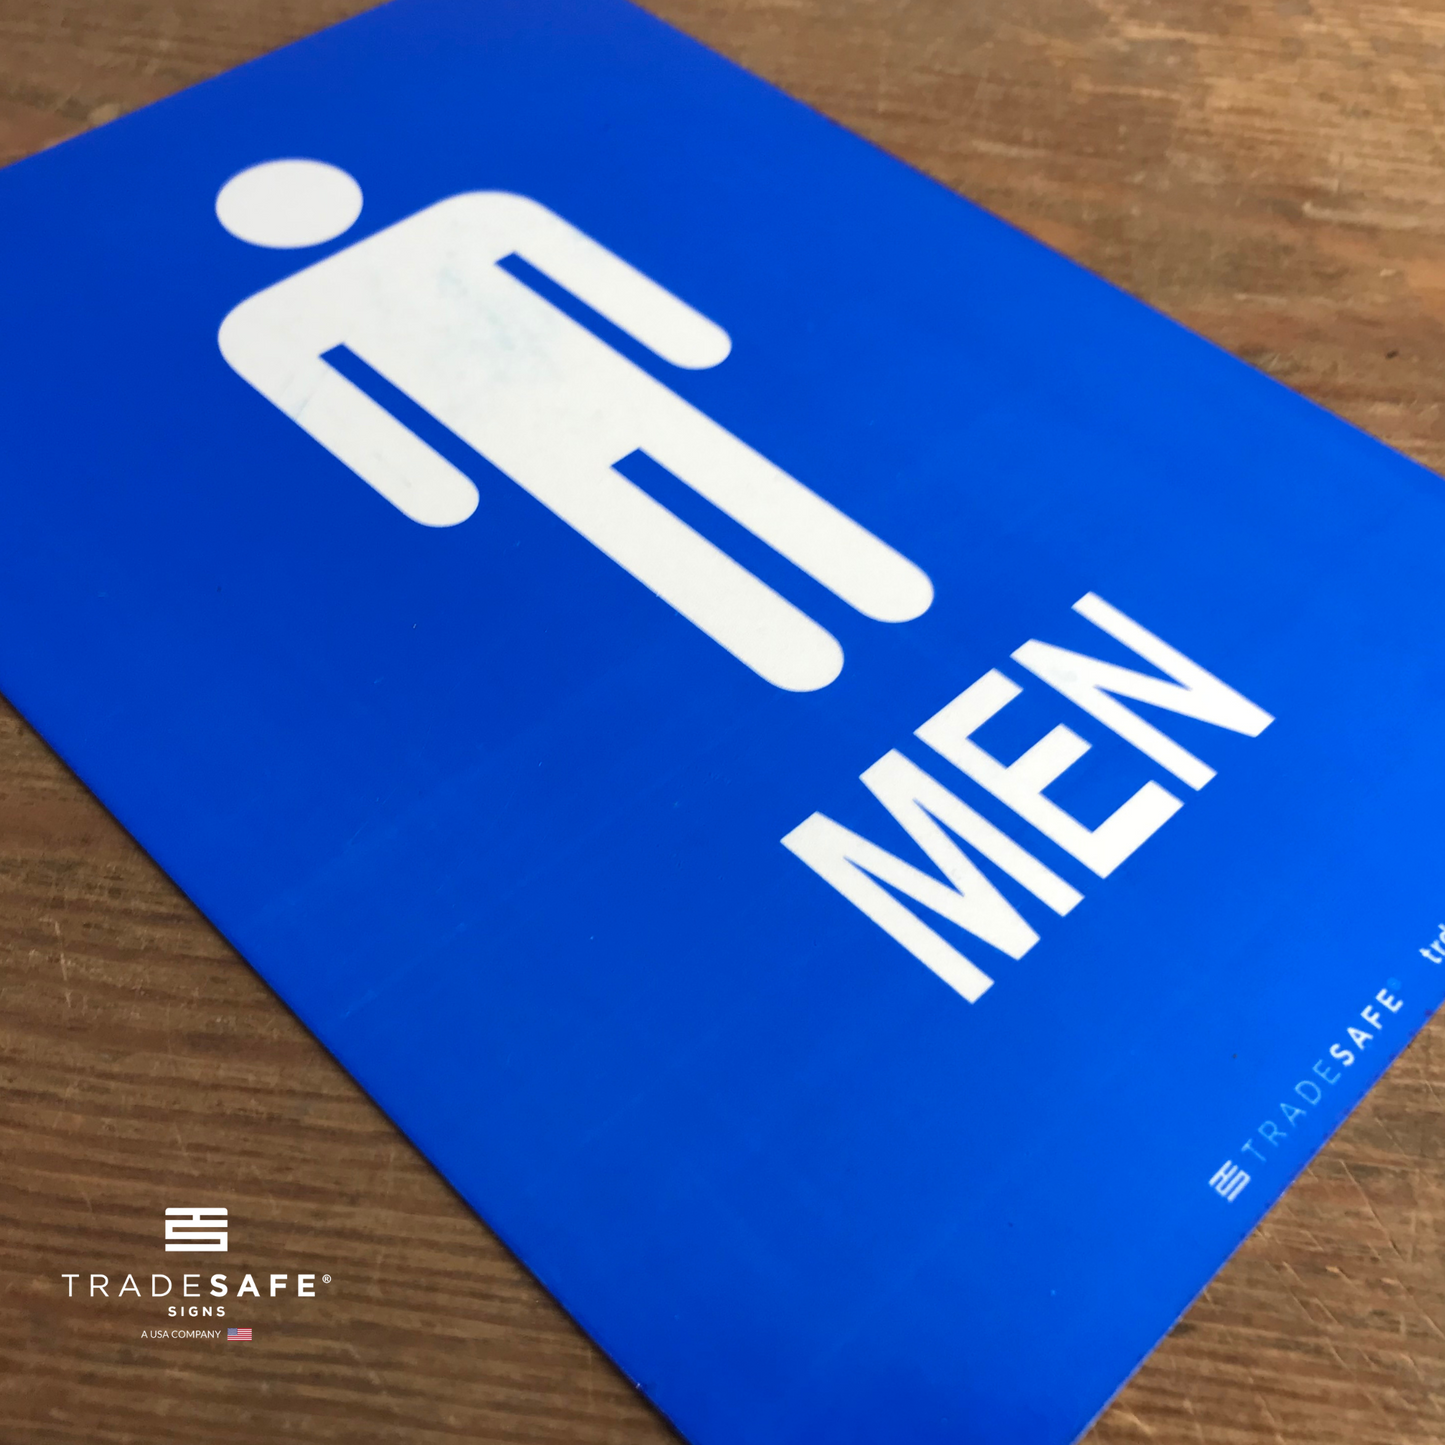 vibrant and highly visible men's restroom sign